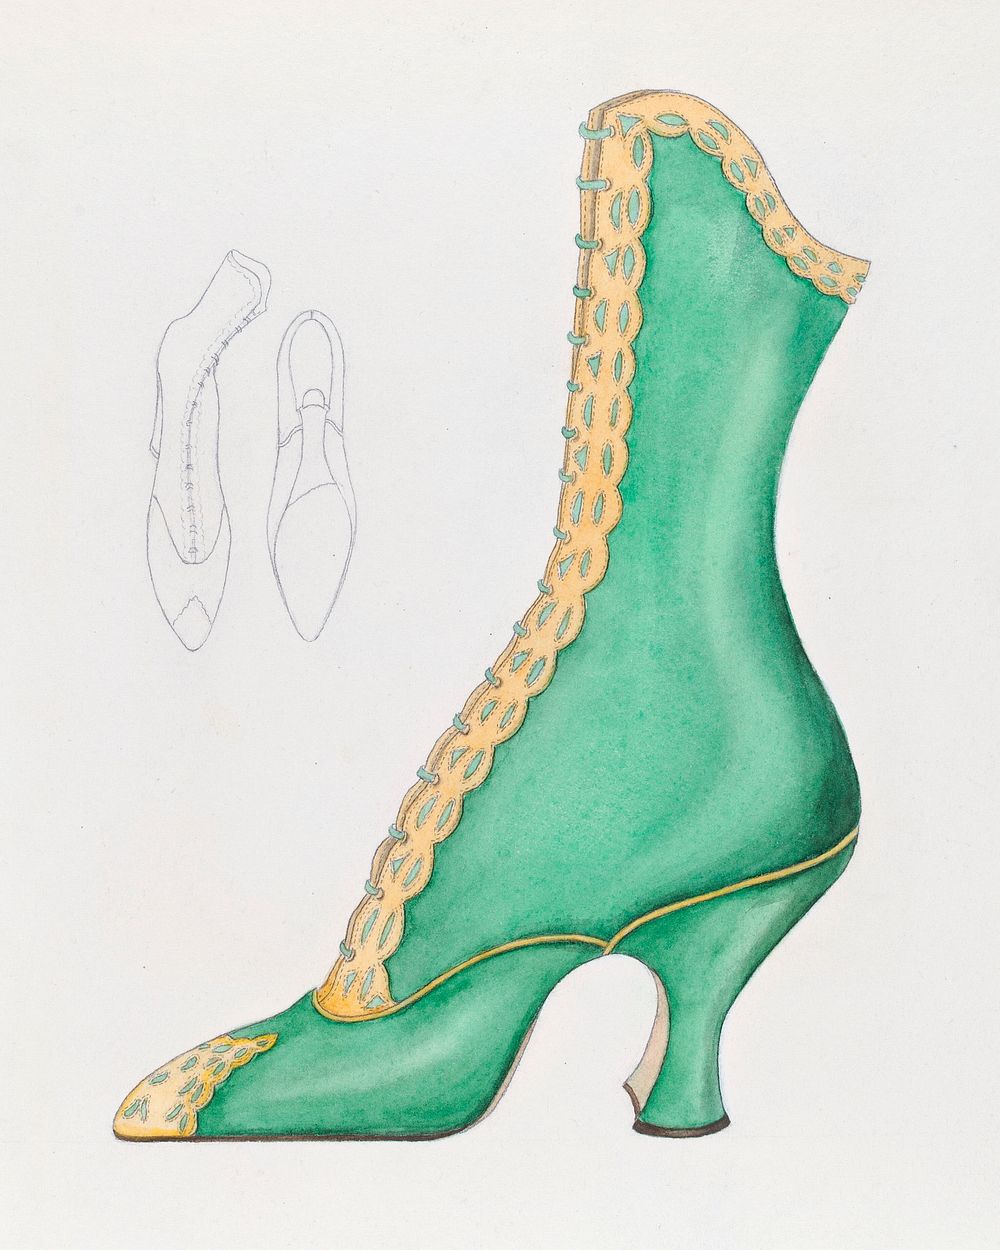 Woman's Shoe (ca.1936) by Nancy Crimi. Original from The National Gallery of Art. Digitally enhanced by rawpixel.